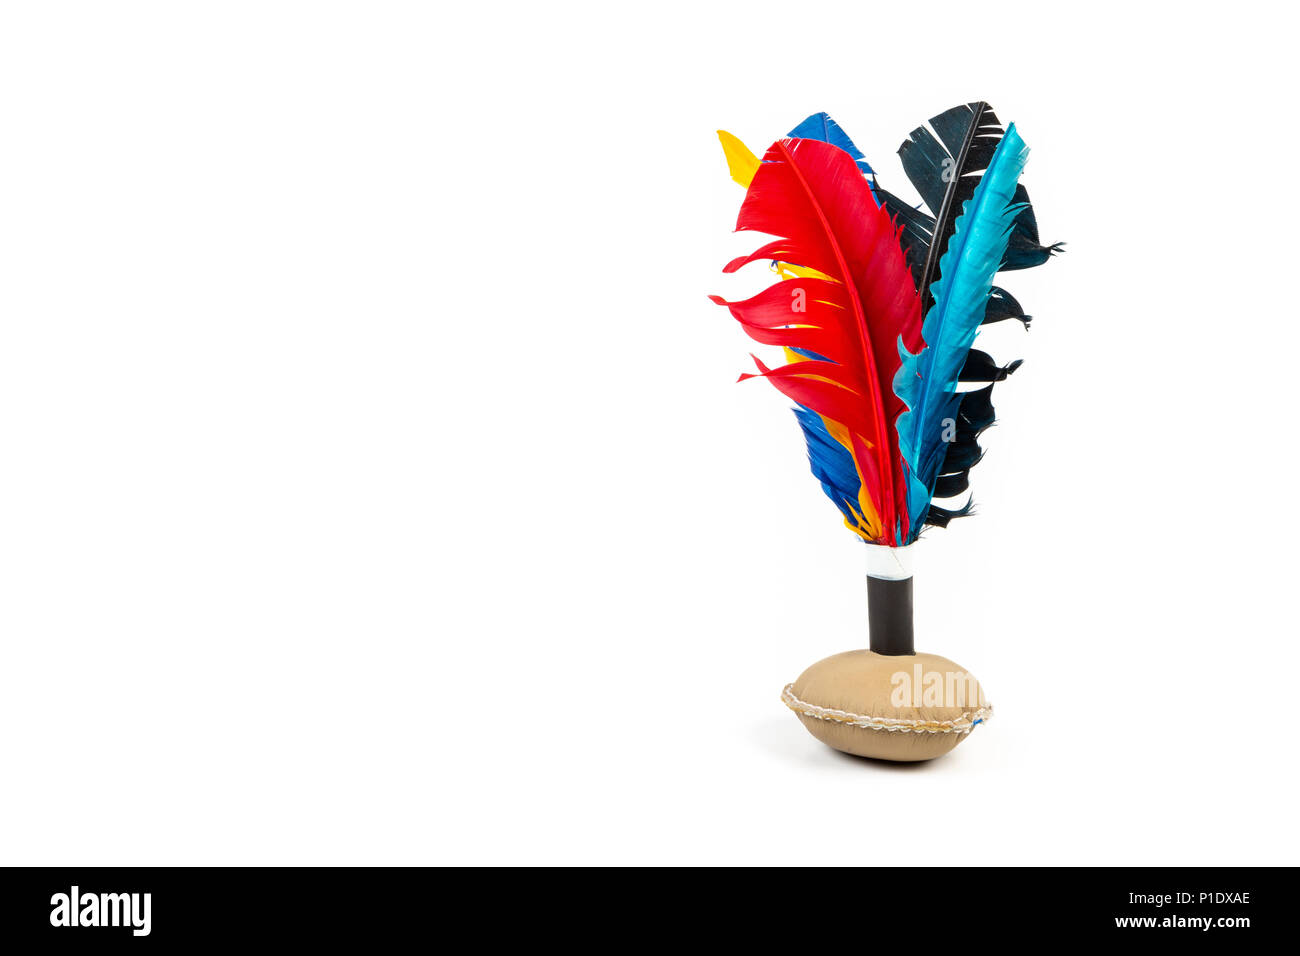 Handmade shuttlecock toy with colourful feathers on white background. Stock Photo